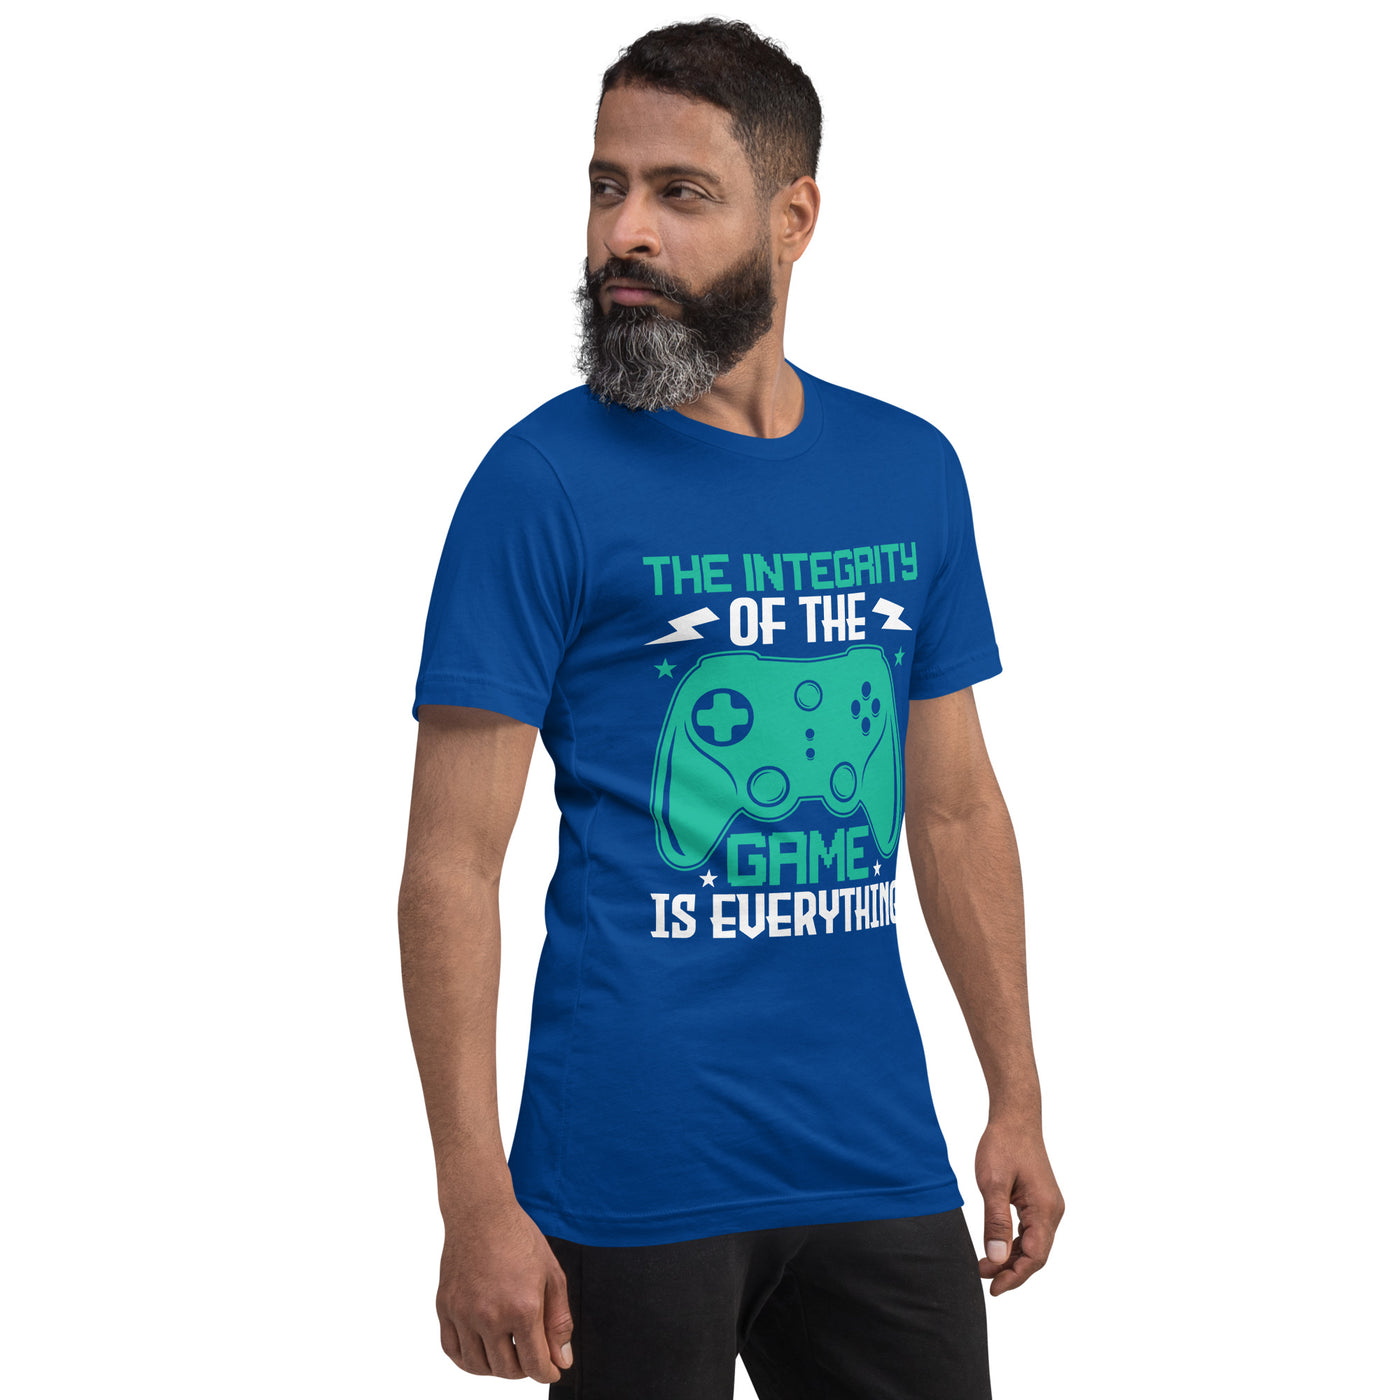 The Integrity of The Game is Everything (Swarna) - Unisex t-shirt